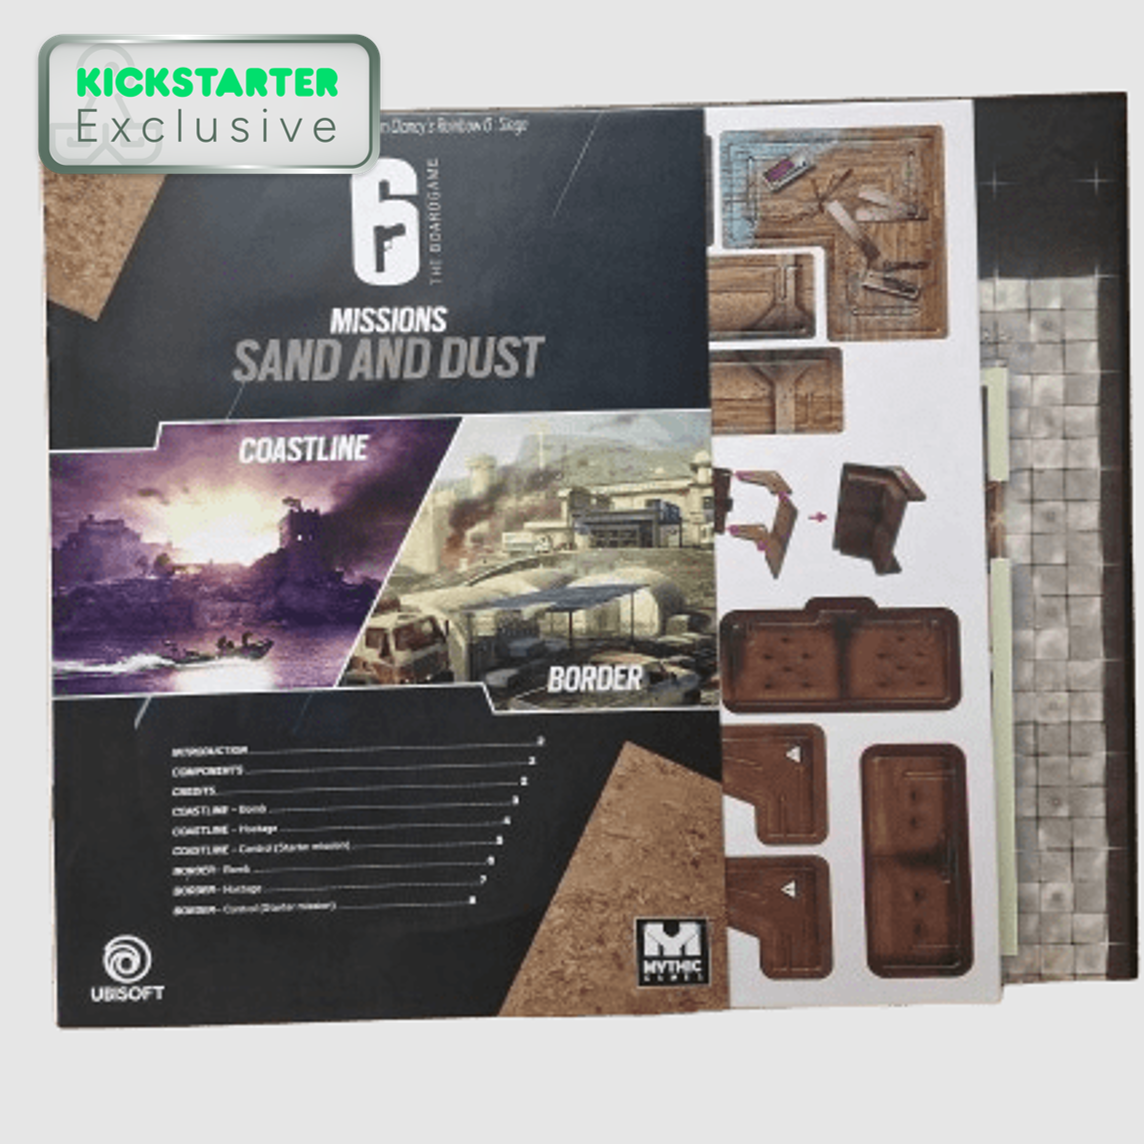 Kickstarter Exclusive Map Pack 3 - Sand and Dust Expansion Contents From 6: Siege - The Board Game